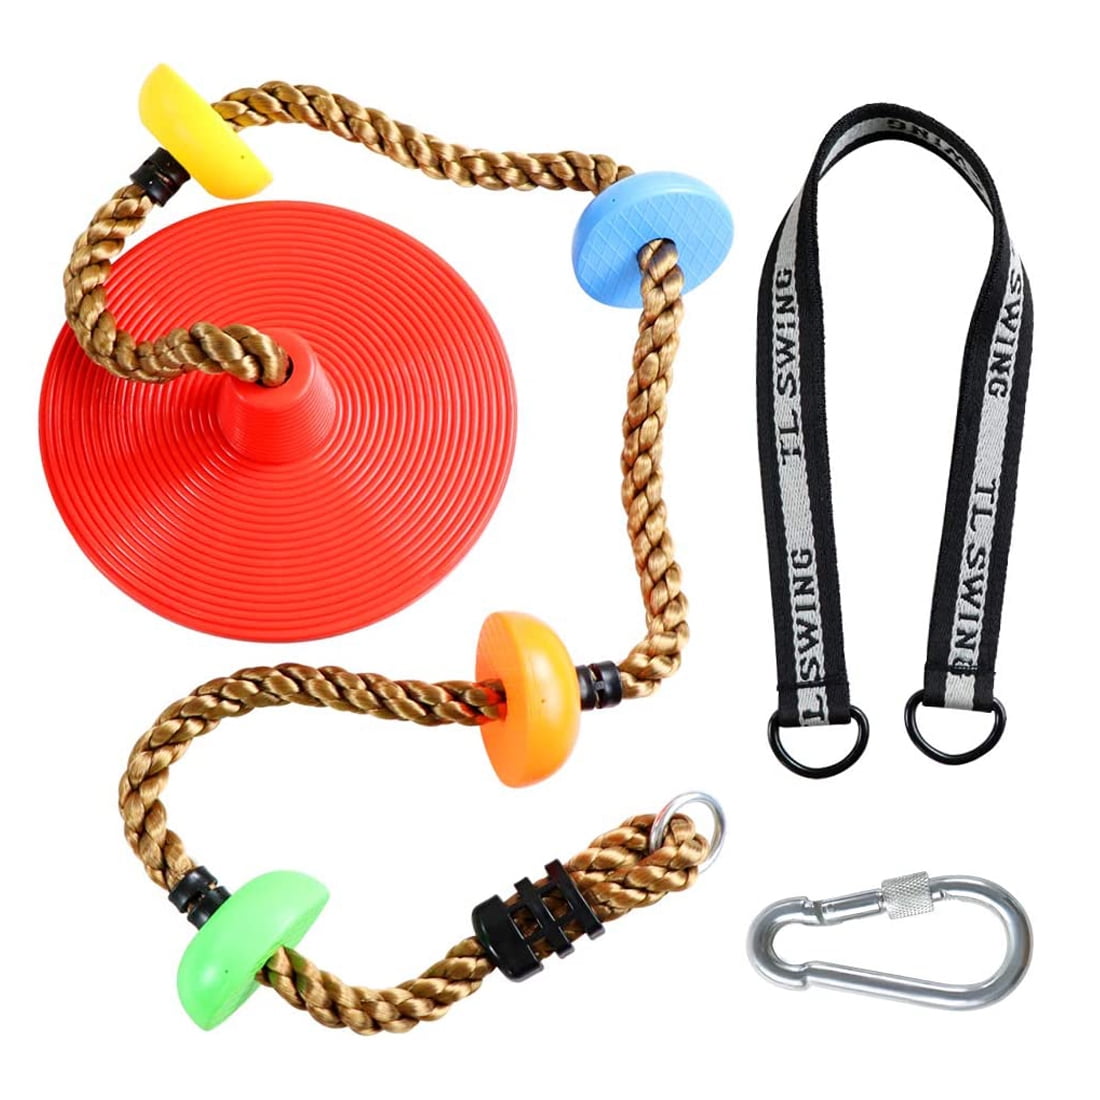 Spinning Attachment for Tire Swings Activity Zone Swing Swivel Spinner Climbing Rope and Swing Set Accessories 